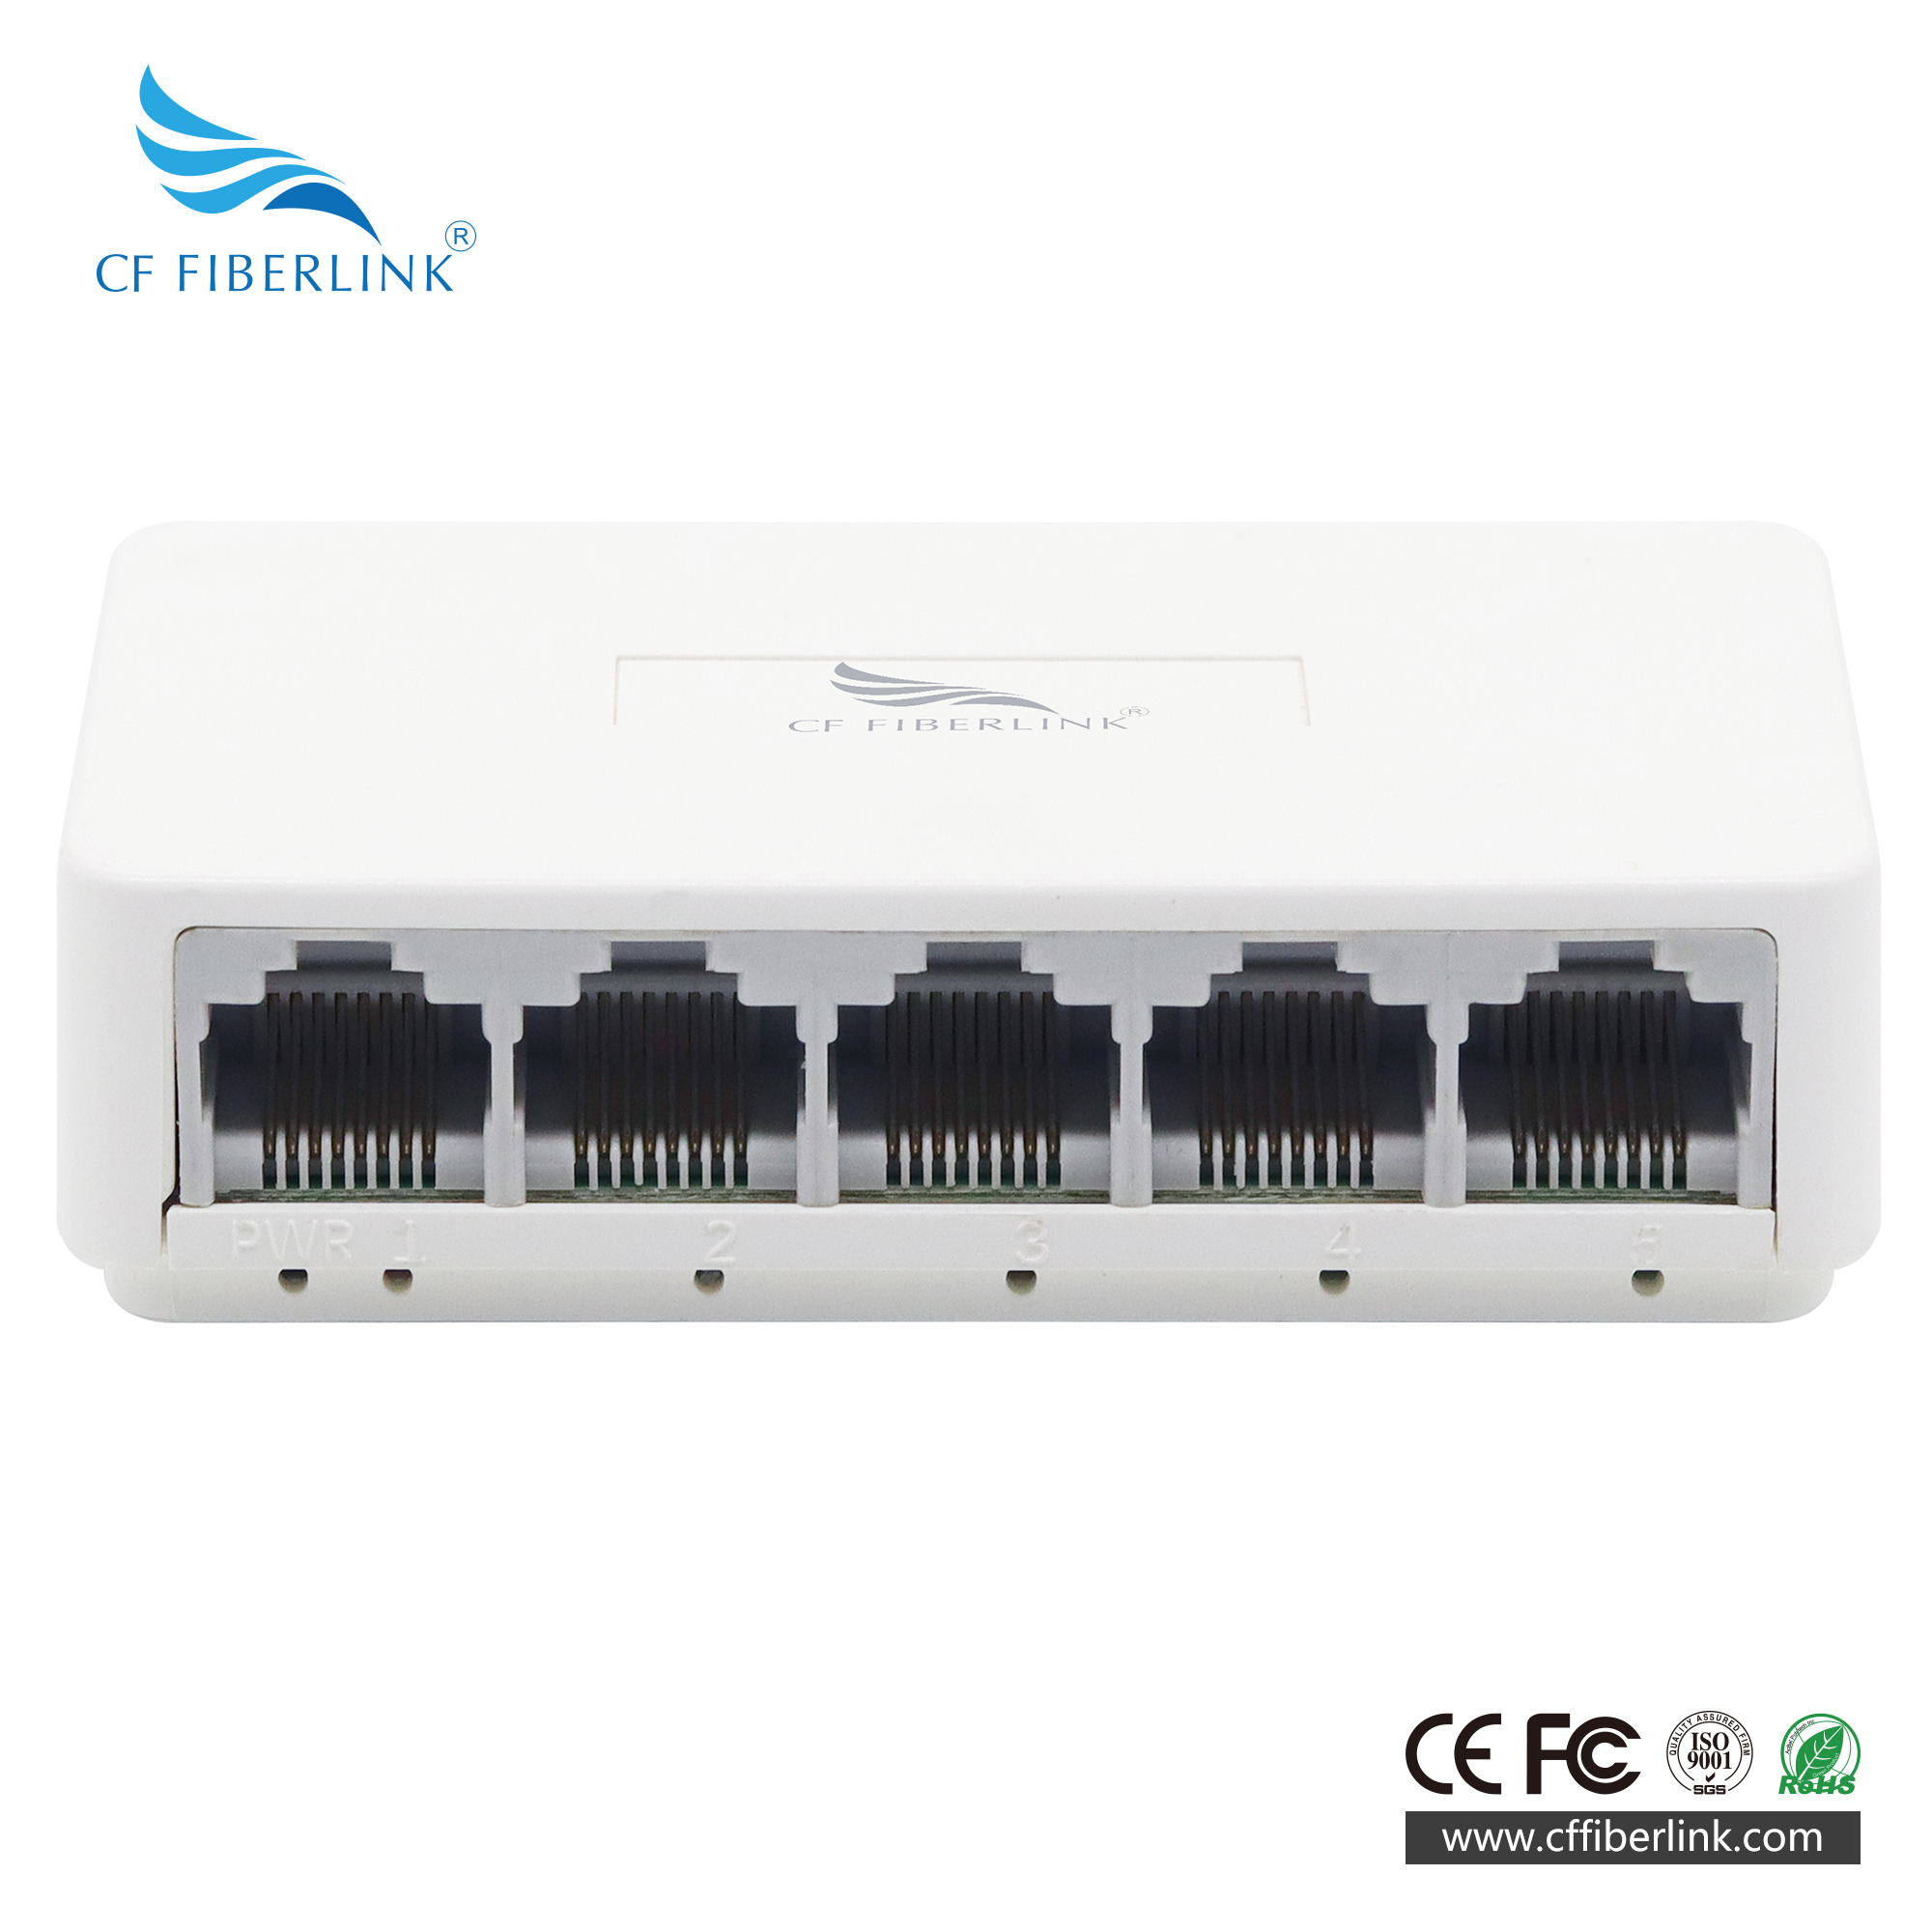 5-port 10/100/1000M Ethernet Switch Featured Image